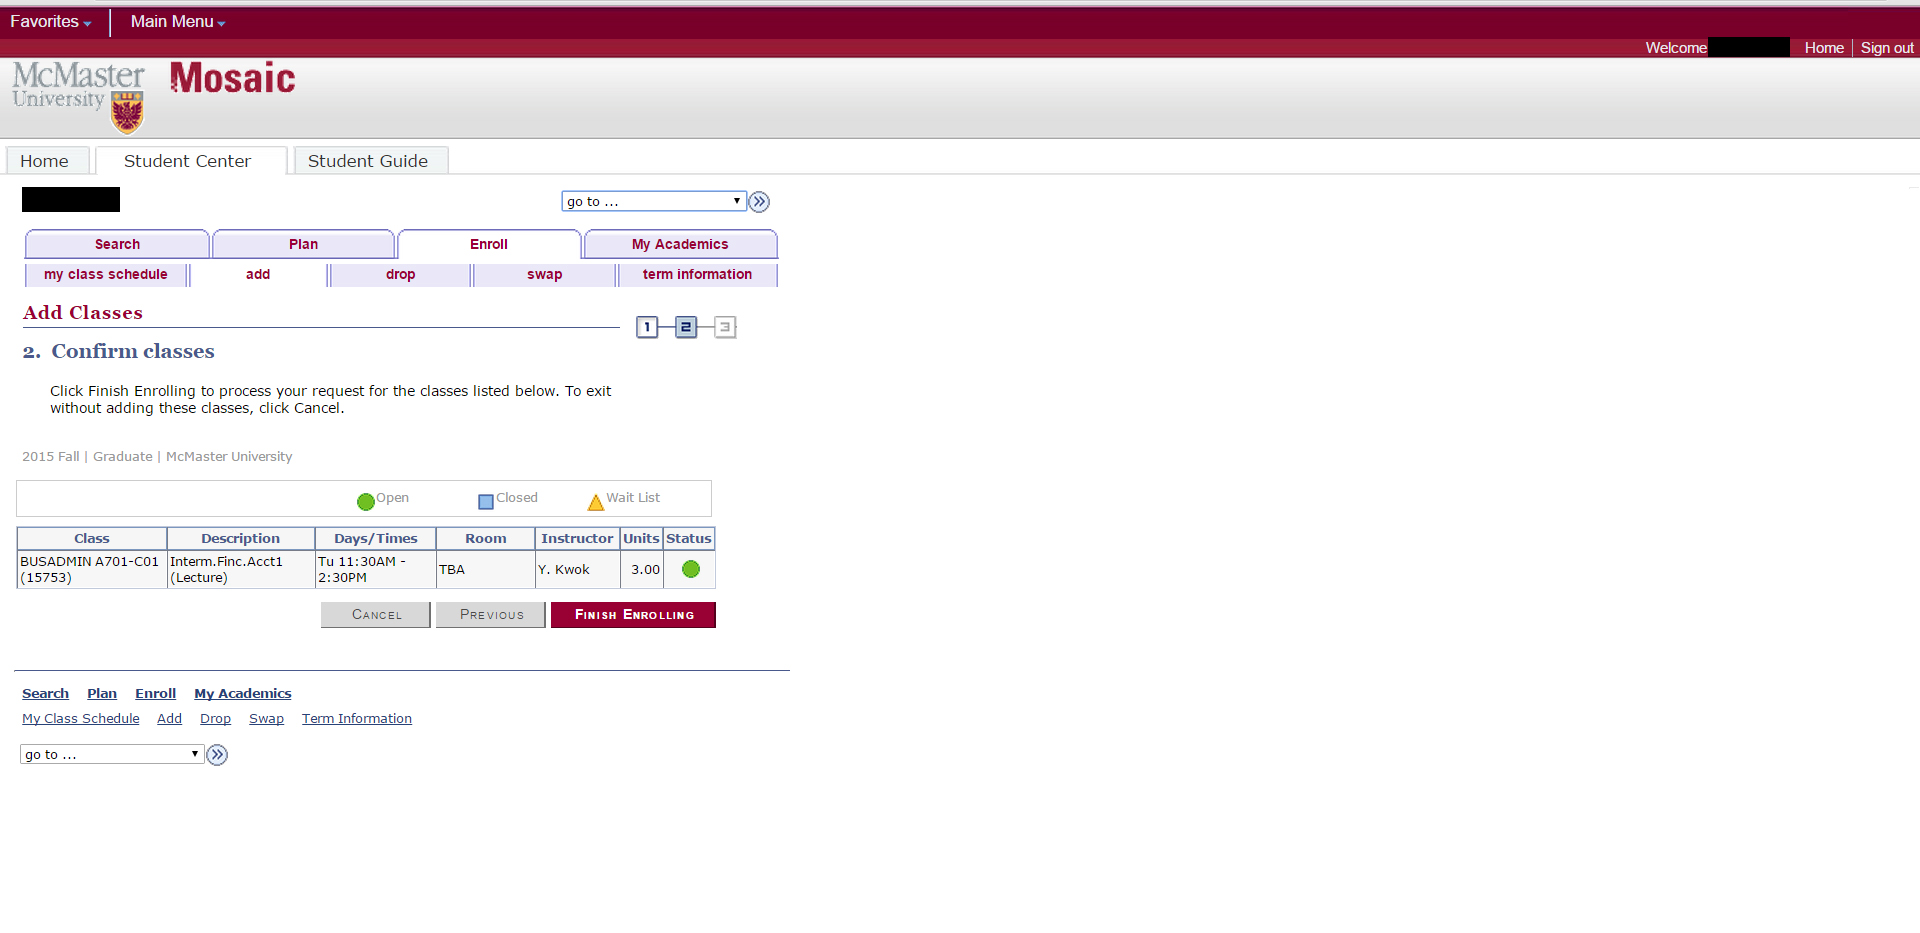 Screenshot of the "add classes" page. Shows a "confirm classes" view.